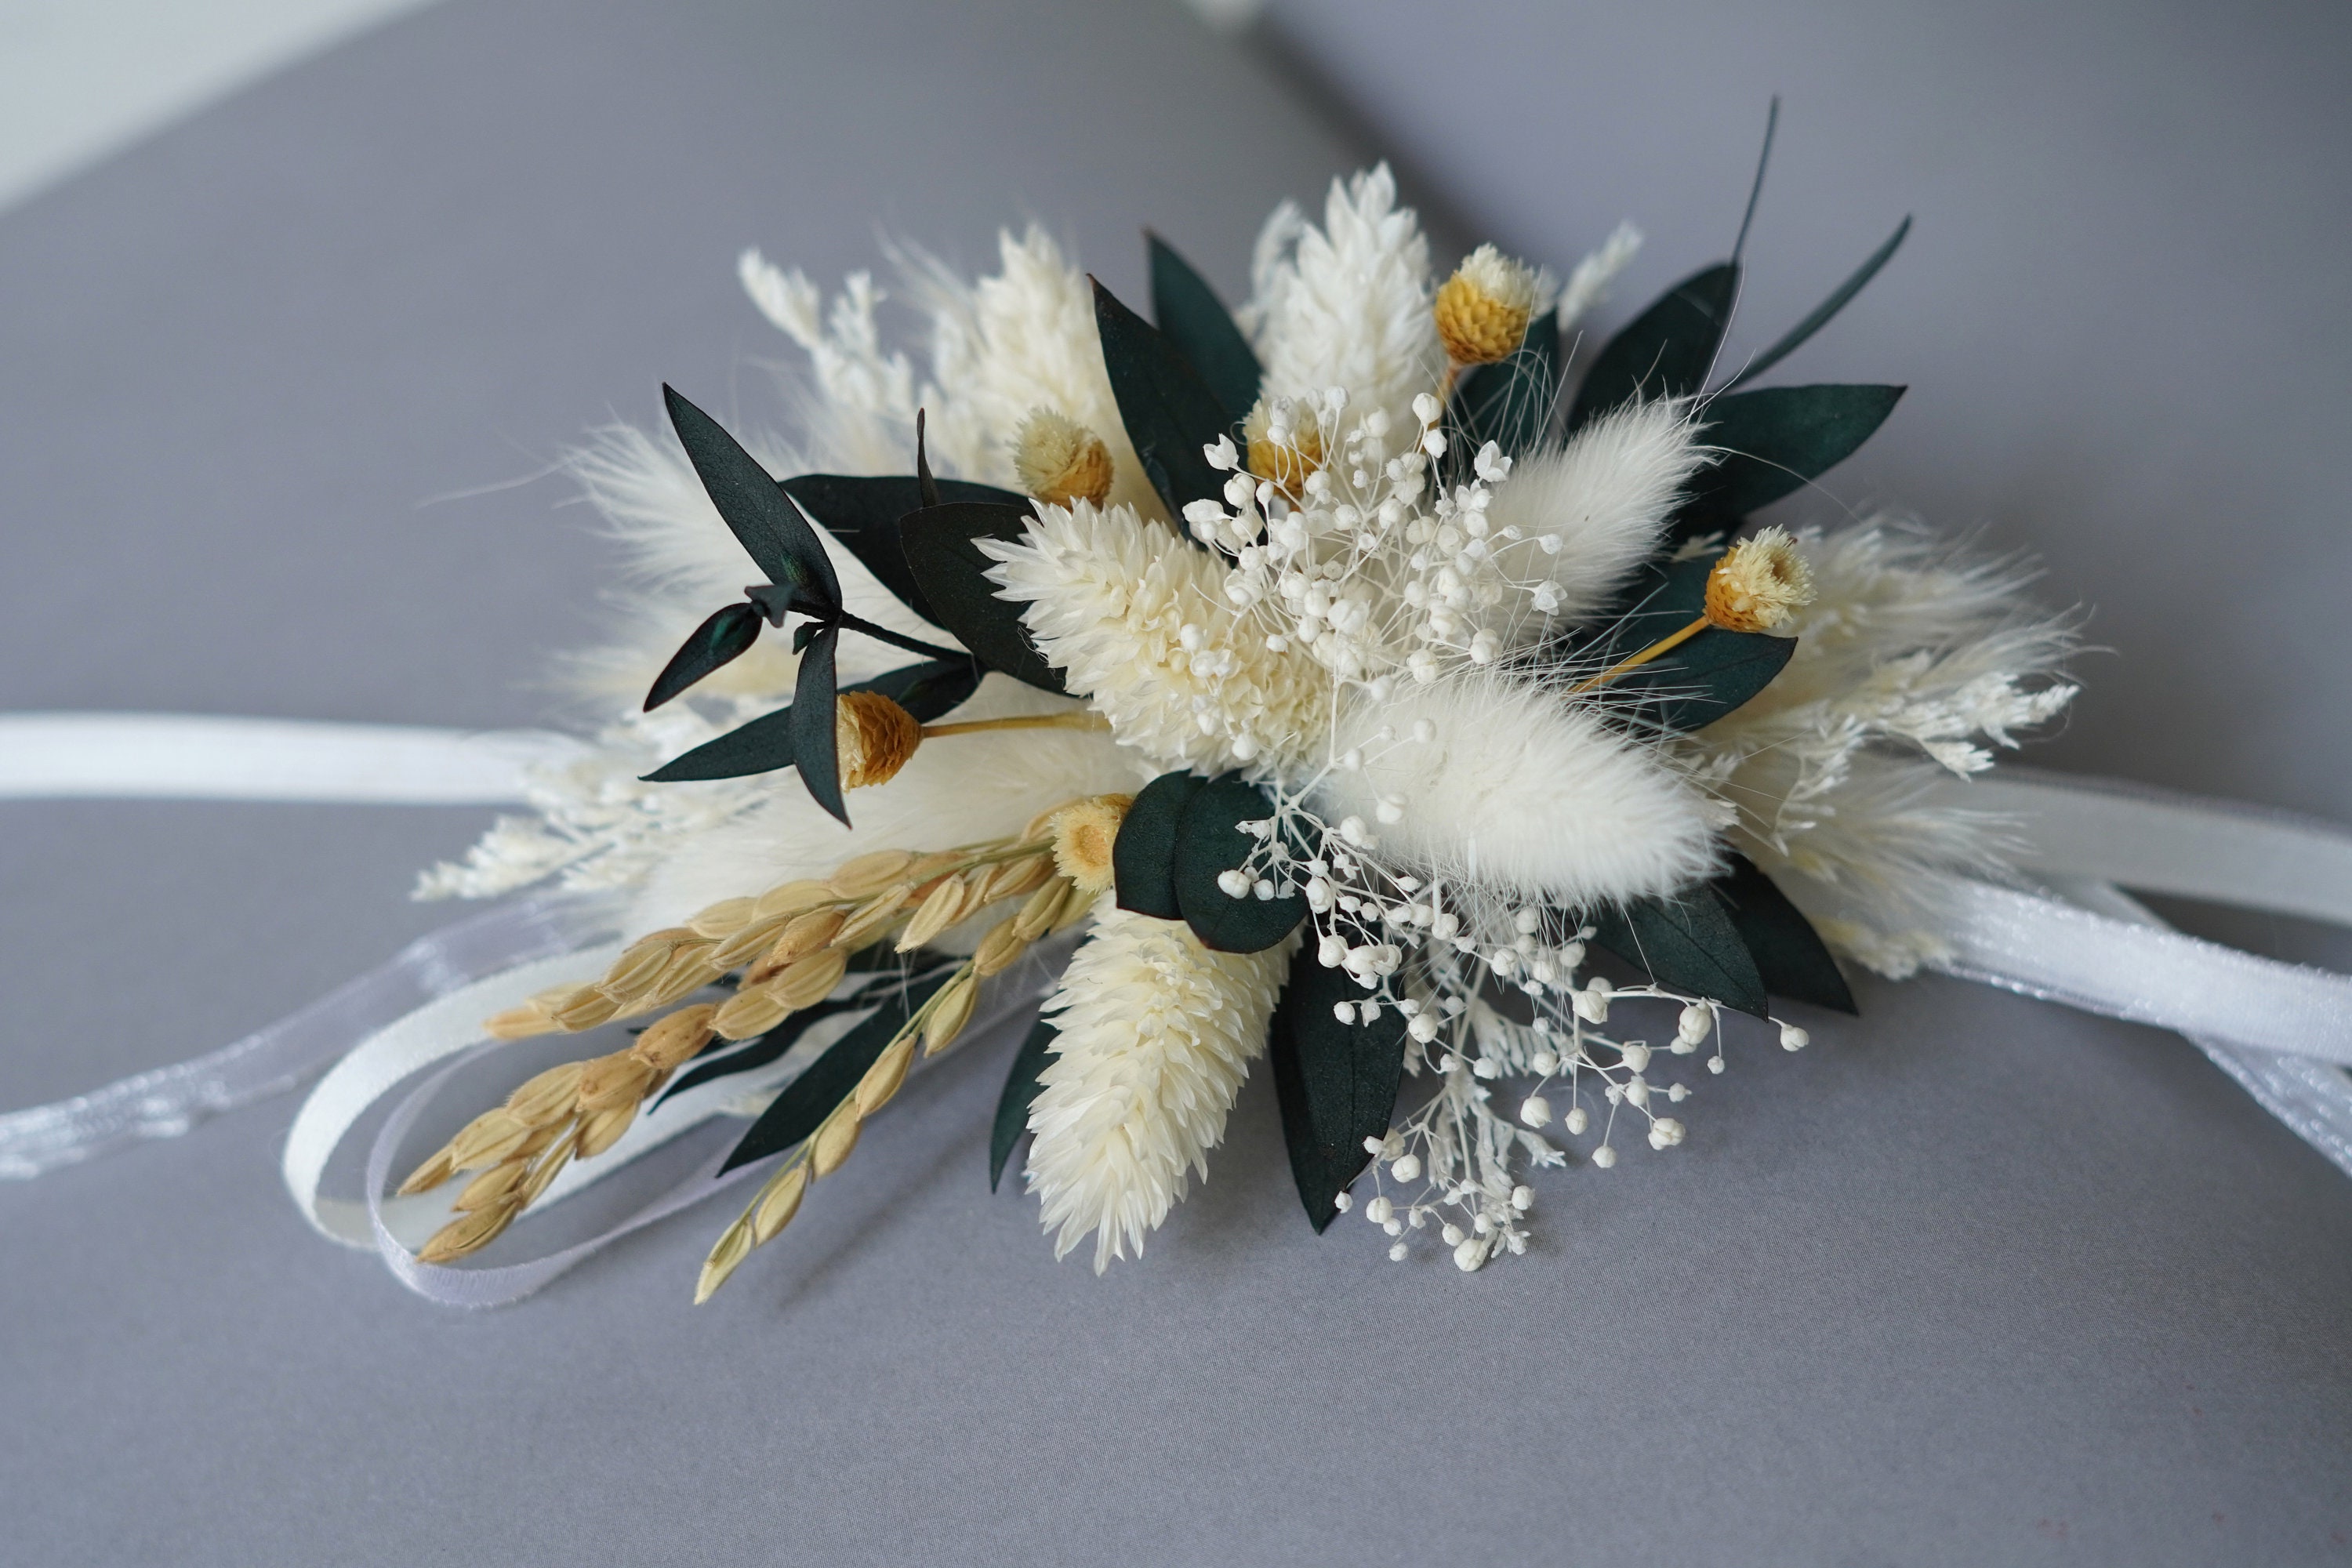 Mini Corsage Flower Bouquet With Bunny Tails And Grass For DIY Wedding,  Baby Shower, And Cake Topper Decor R230626 From Mengqiqi09, $13.23